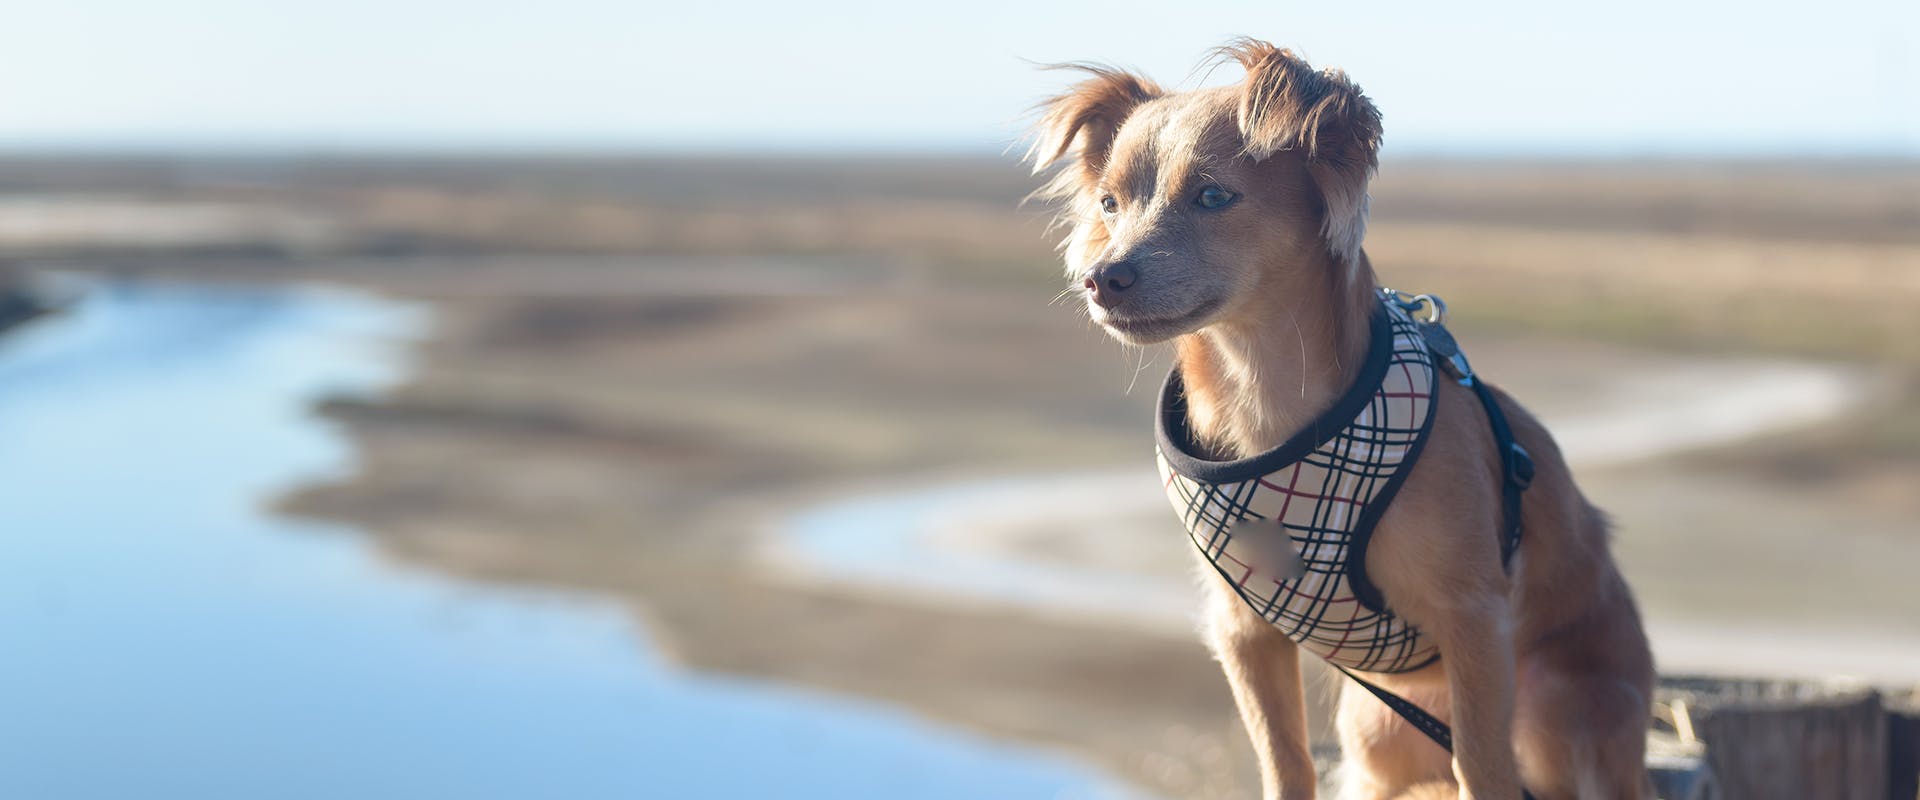 A small dog walking at the coast, wearing a patterened small dog harness